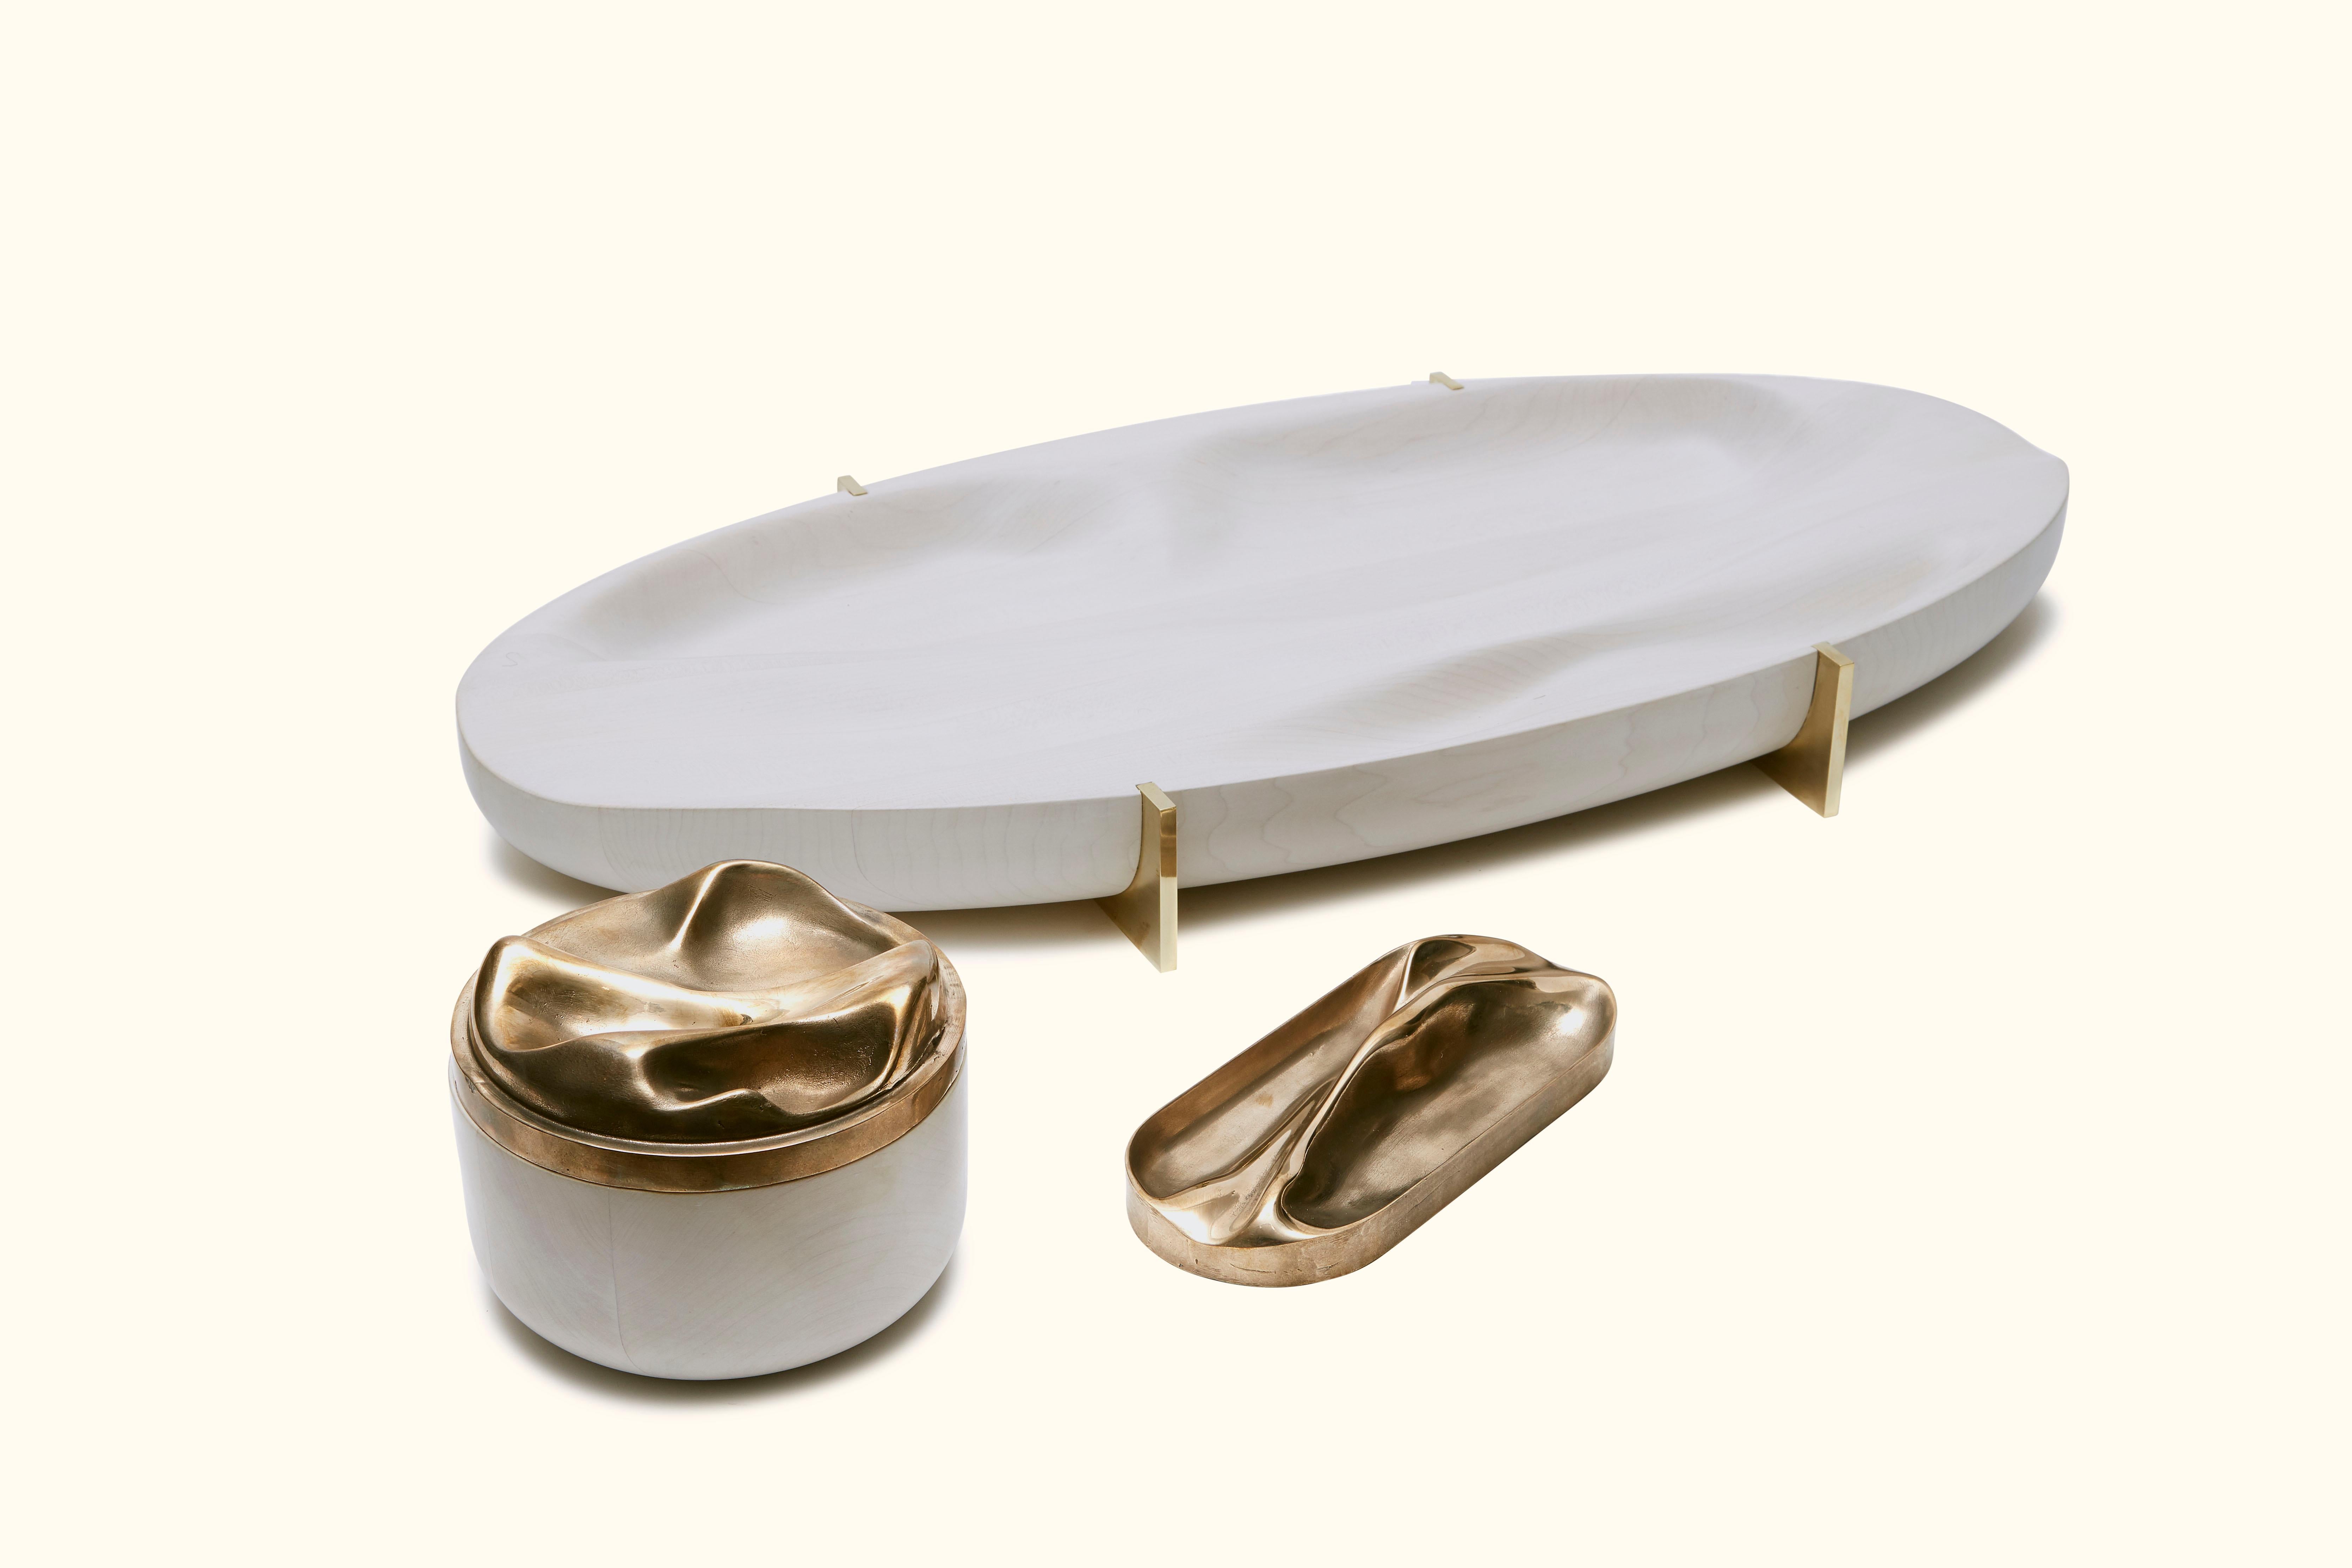 Cast Small Bronze Tray by Artist Vincent Pocsik for Lawson-Fenning, in Stock